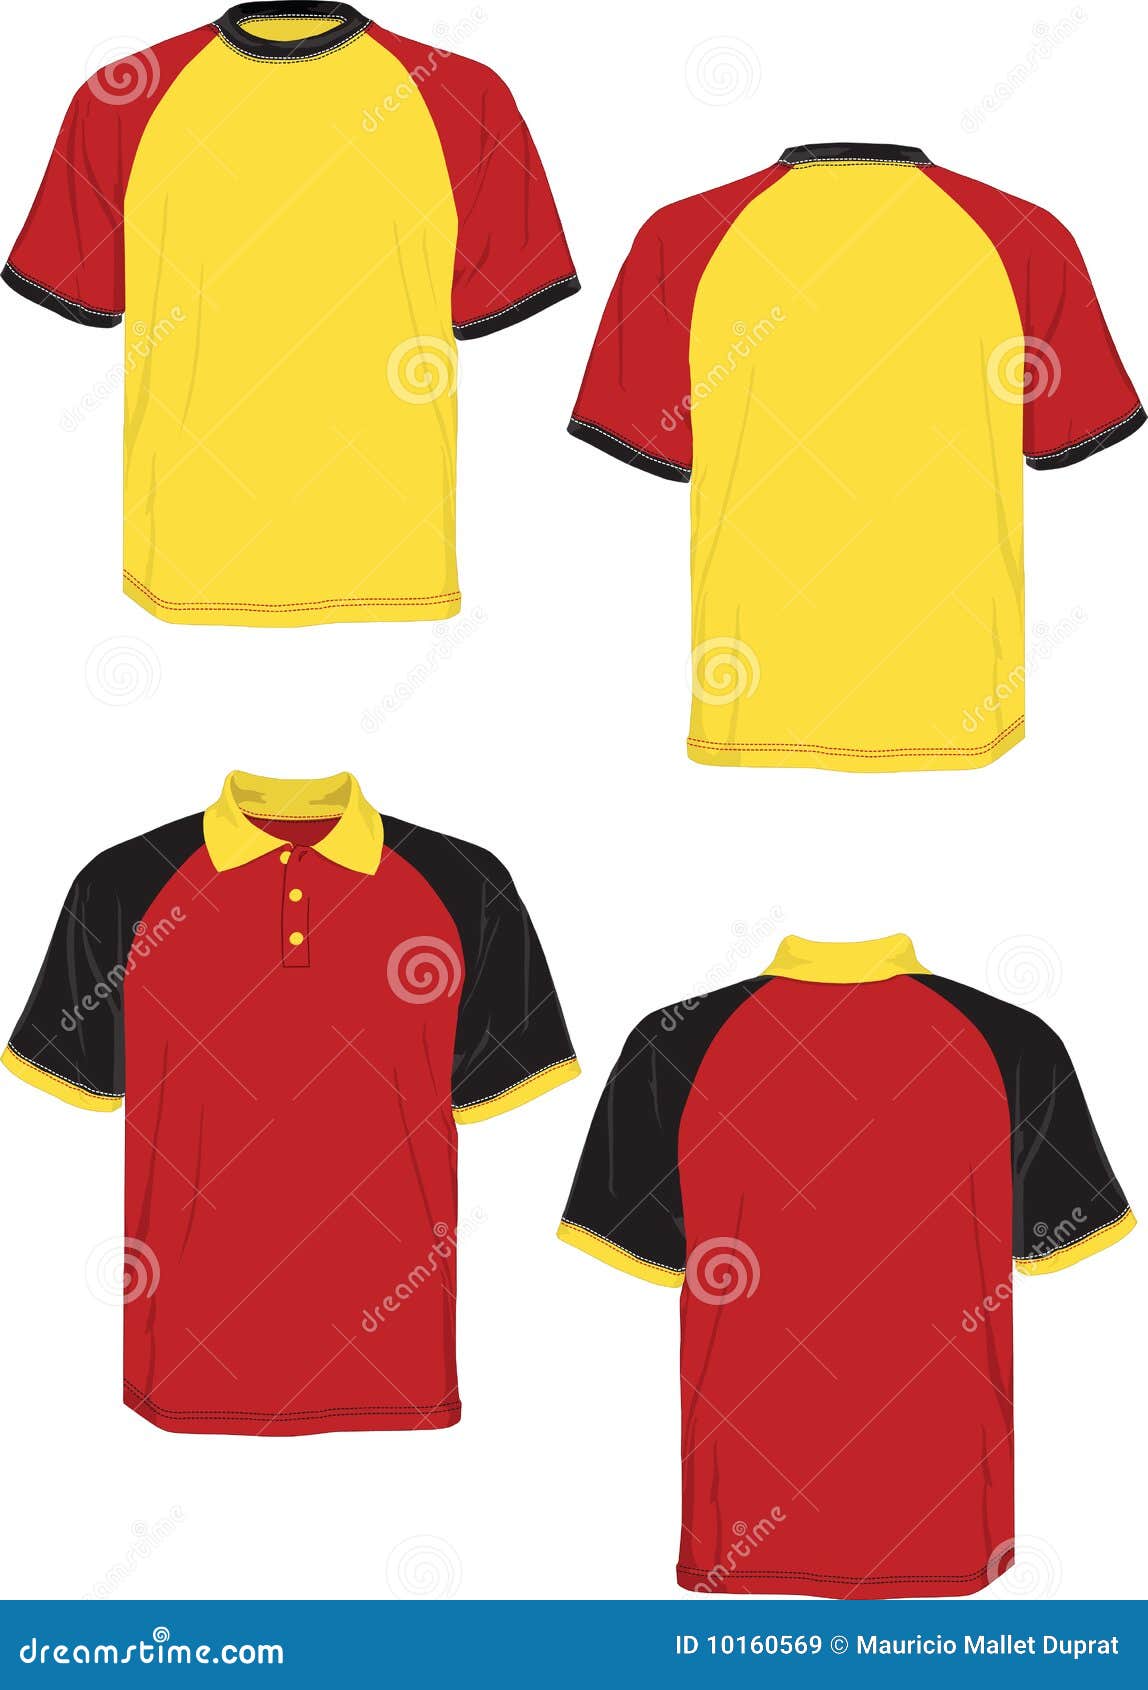 red and yellow black and white shirt